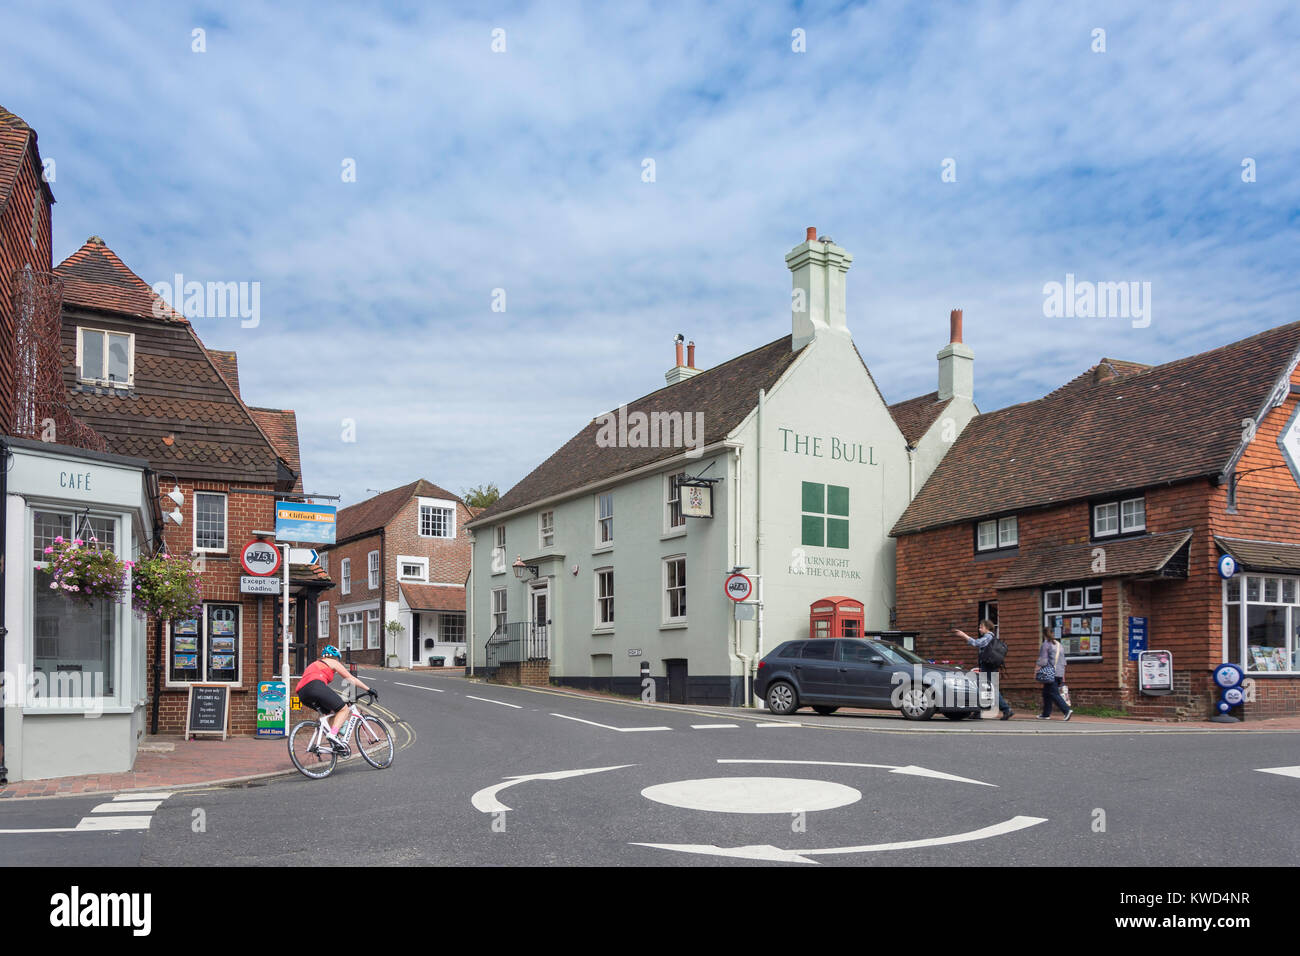 16th century The Bull Ditchling Pub, High Street, Ditchling, West Sussex, England, United Kingdom Stock Photo